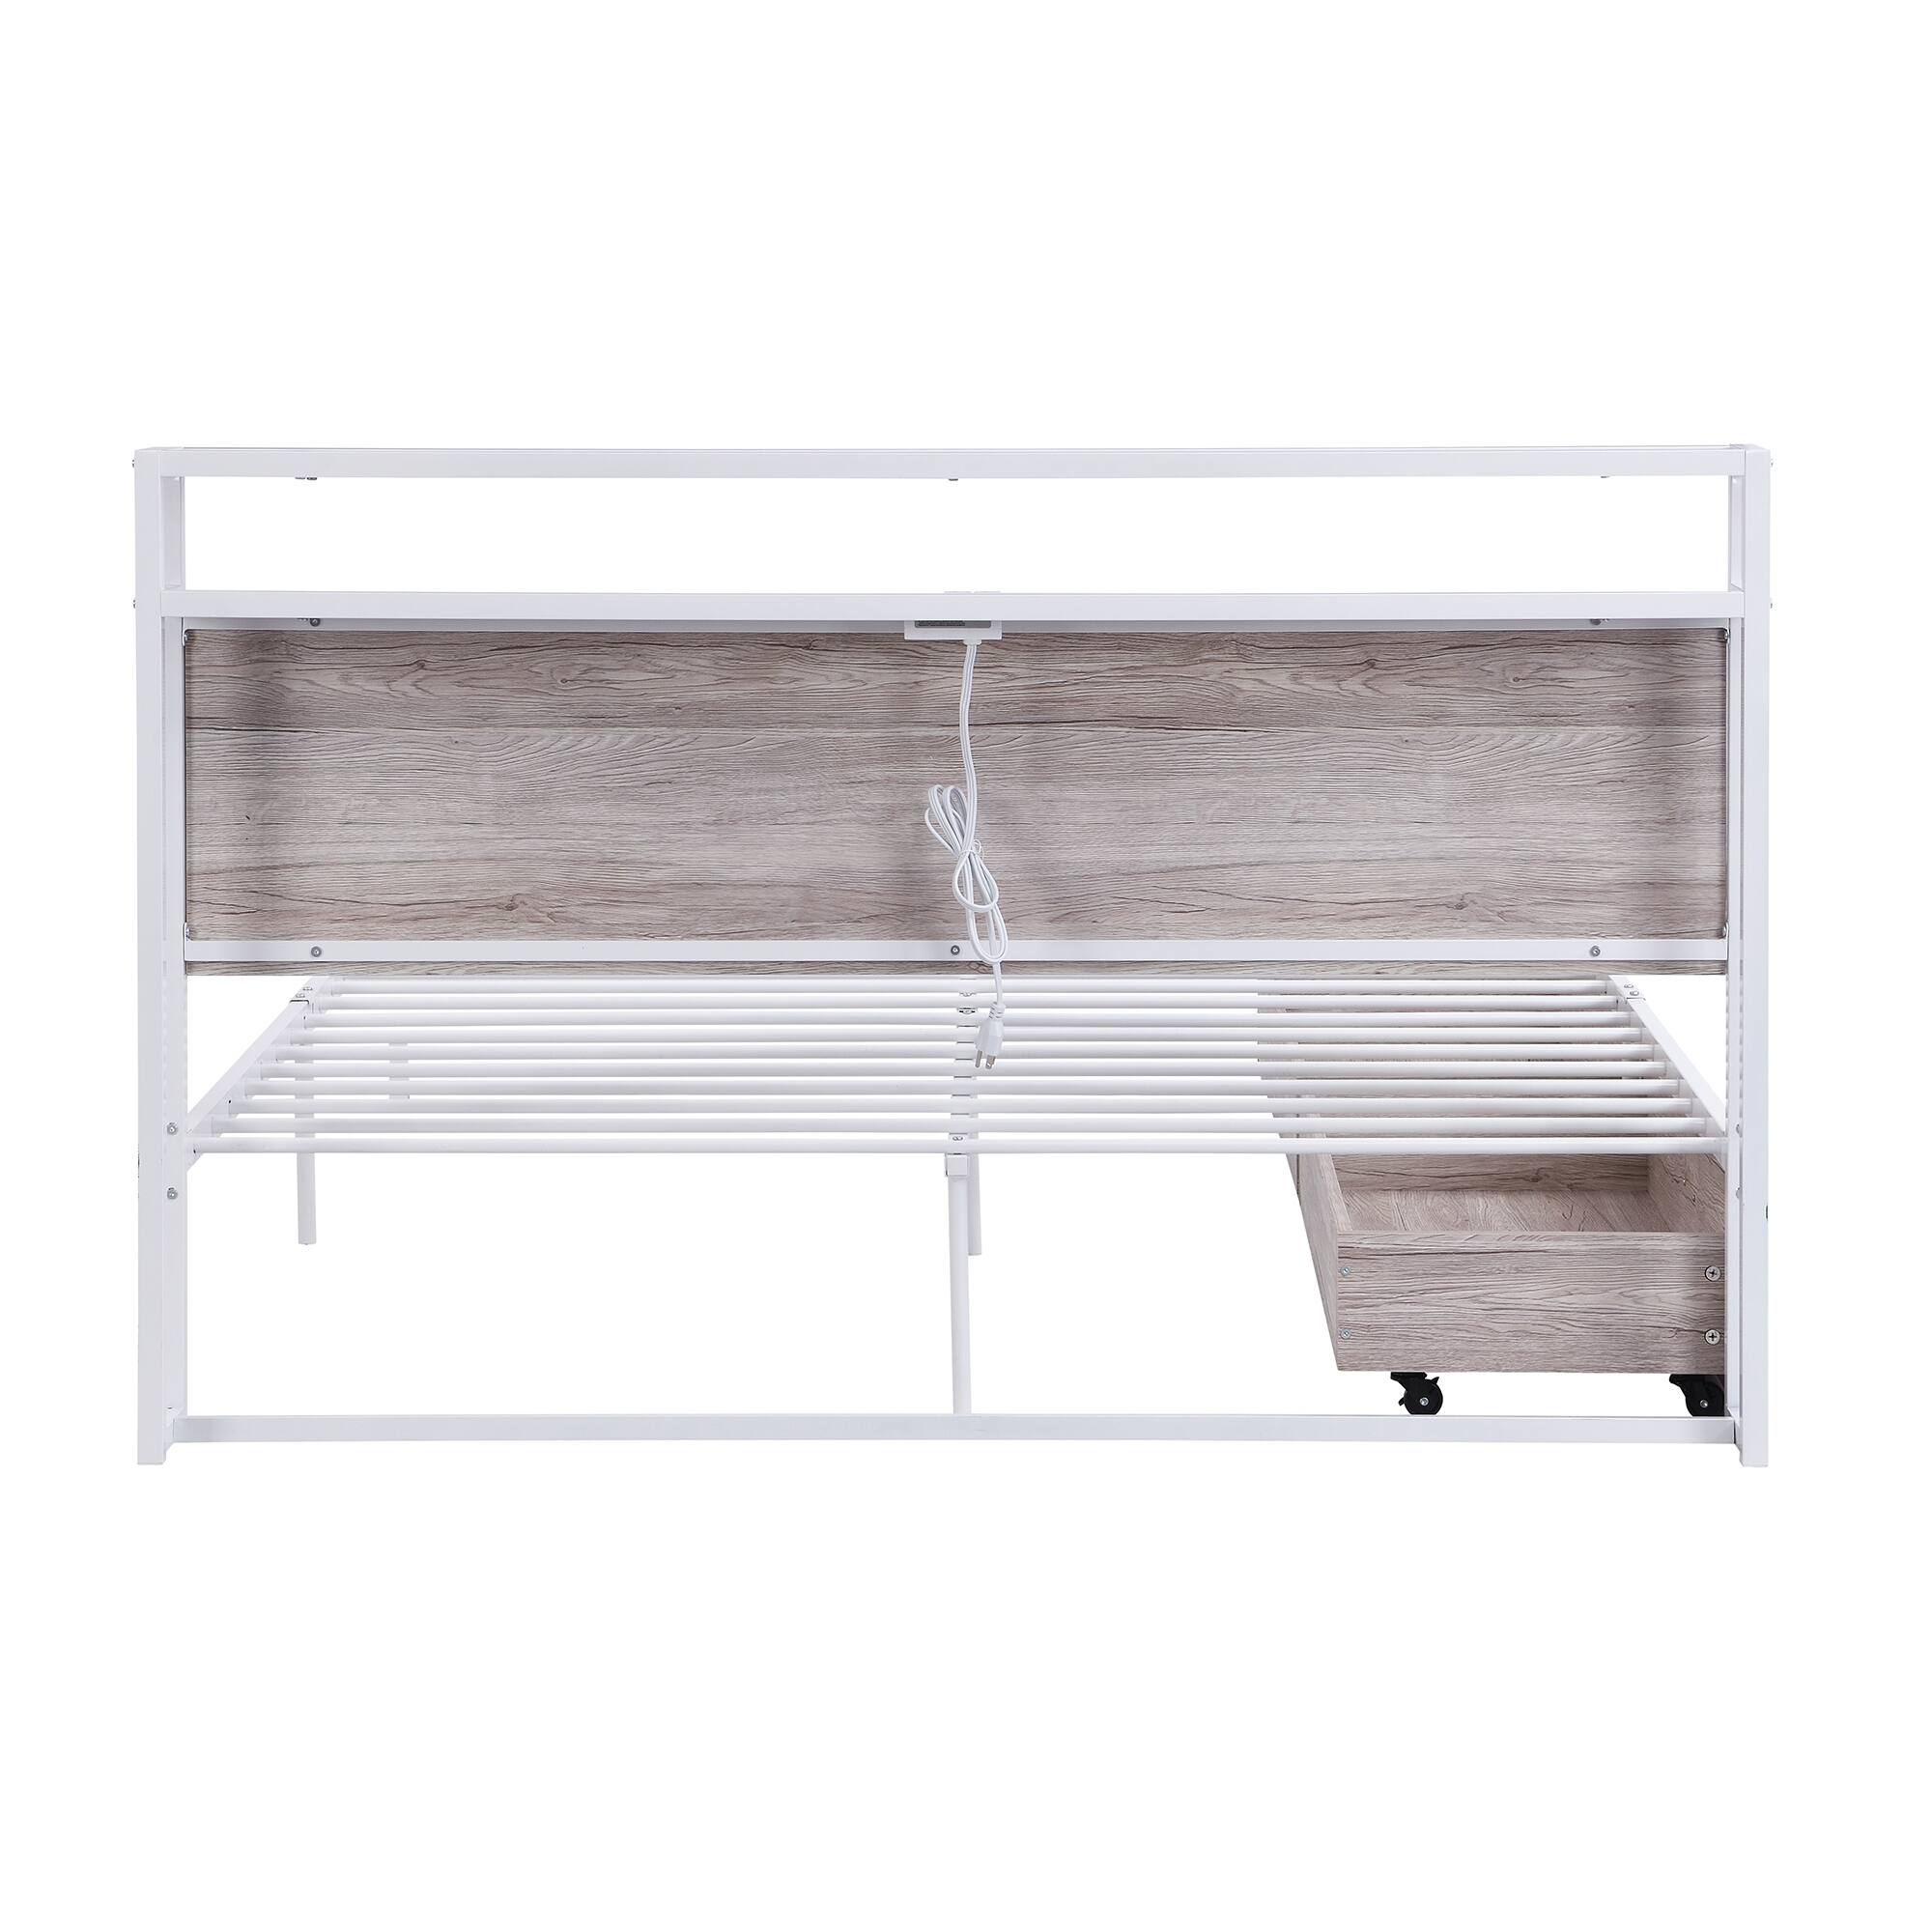 Queen Modern Rustic Metal Platform Bed with 2 Drawers,Sockets,USB Ports & Slat Support, Noise-Free, No Box Spring Needed, White